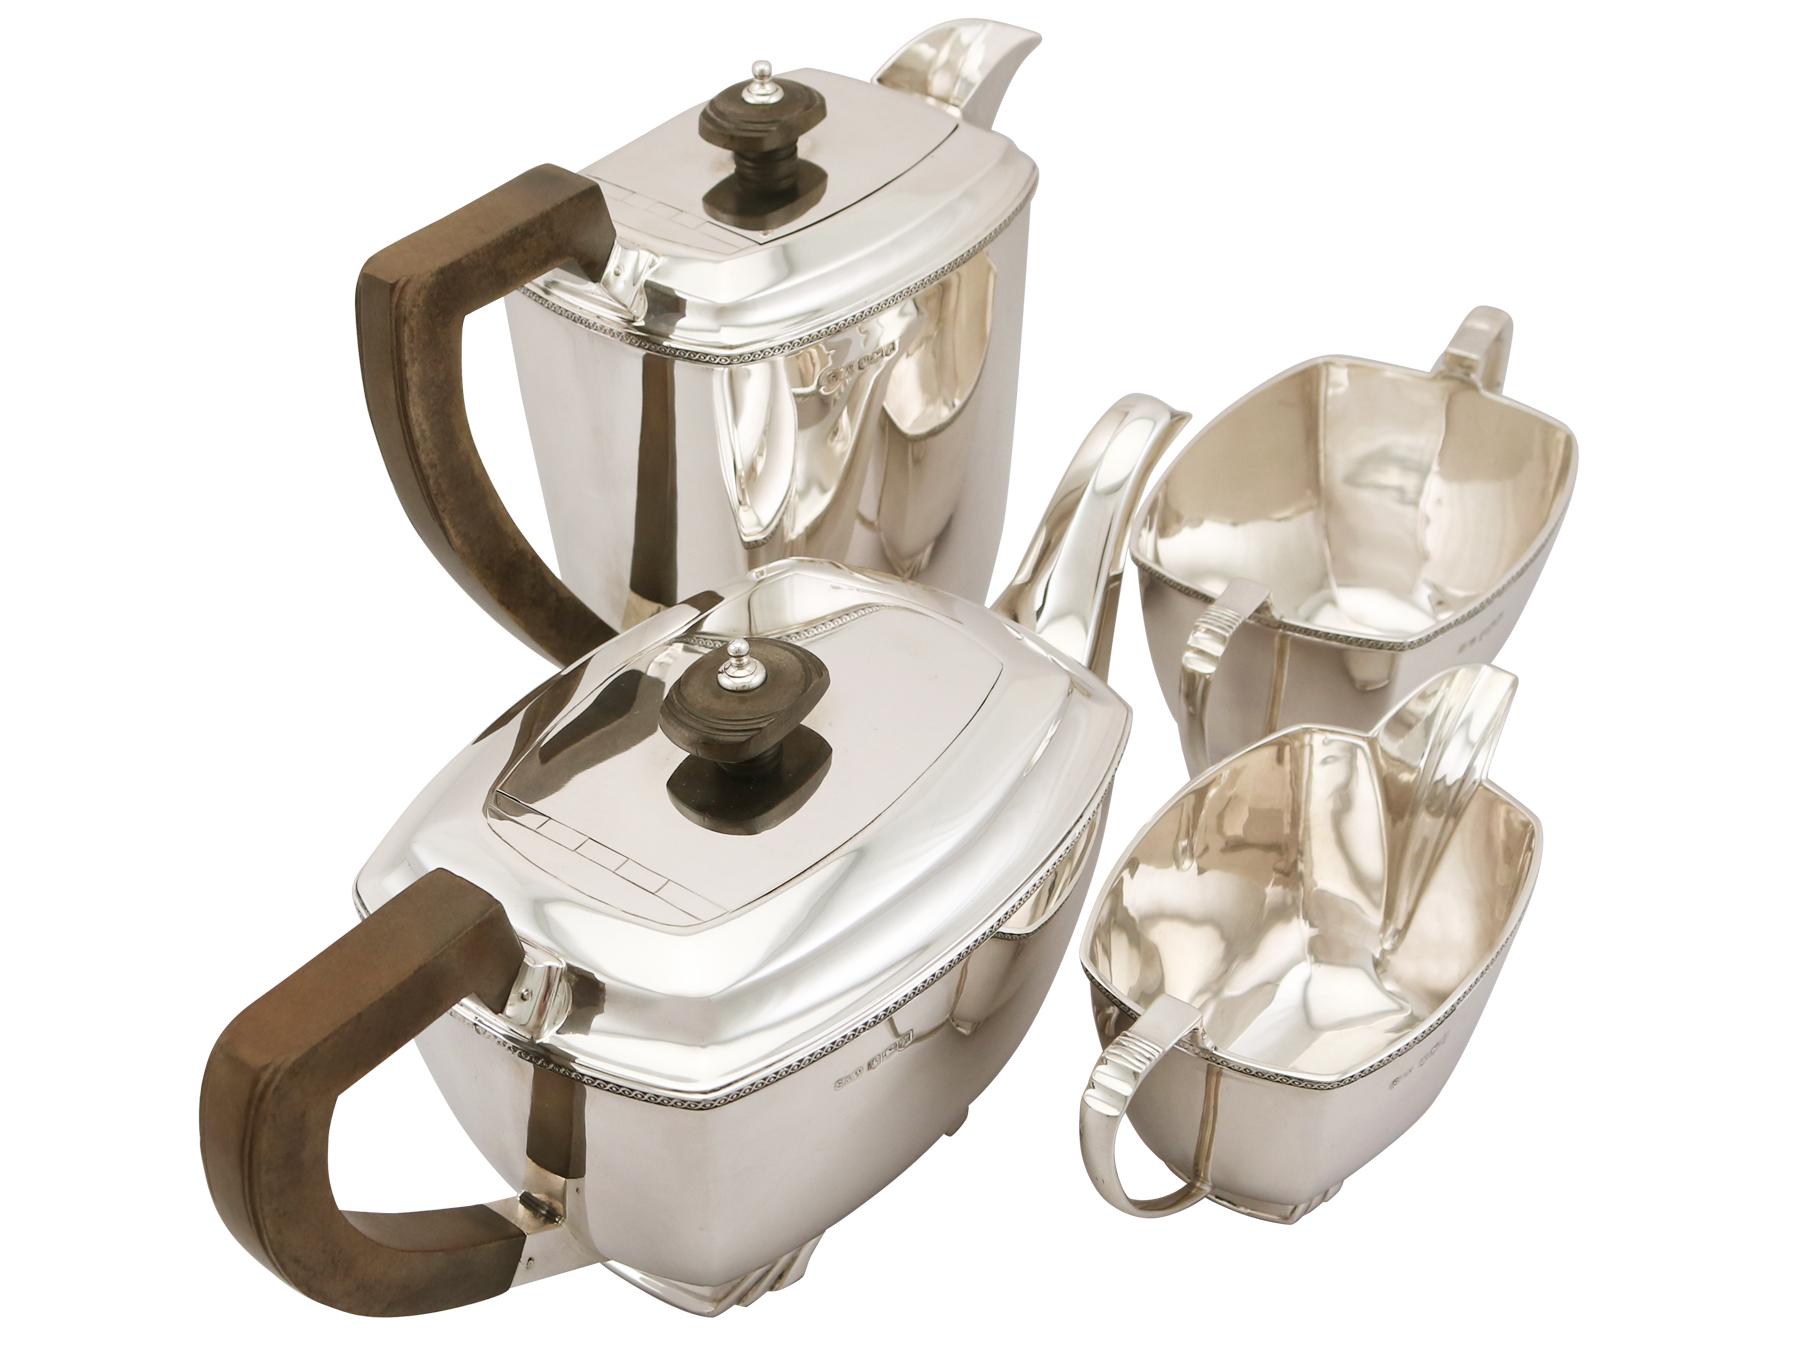 A fine and impressive vintage George VI English sterling silver four-piece tea and coffee service in the Art Deco style; an addition to our silver teaware collection.
This fine vintage George VI sterling silver four piece tea and coffee service/set